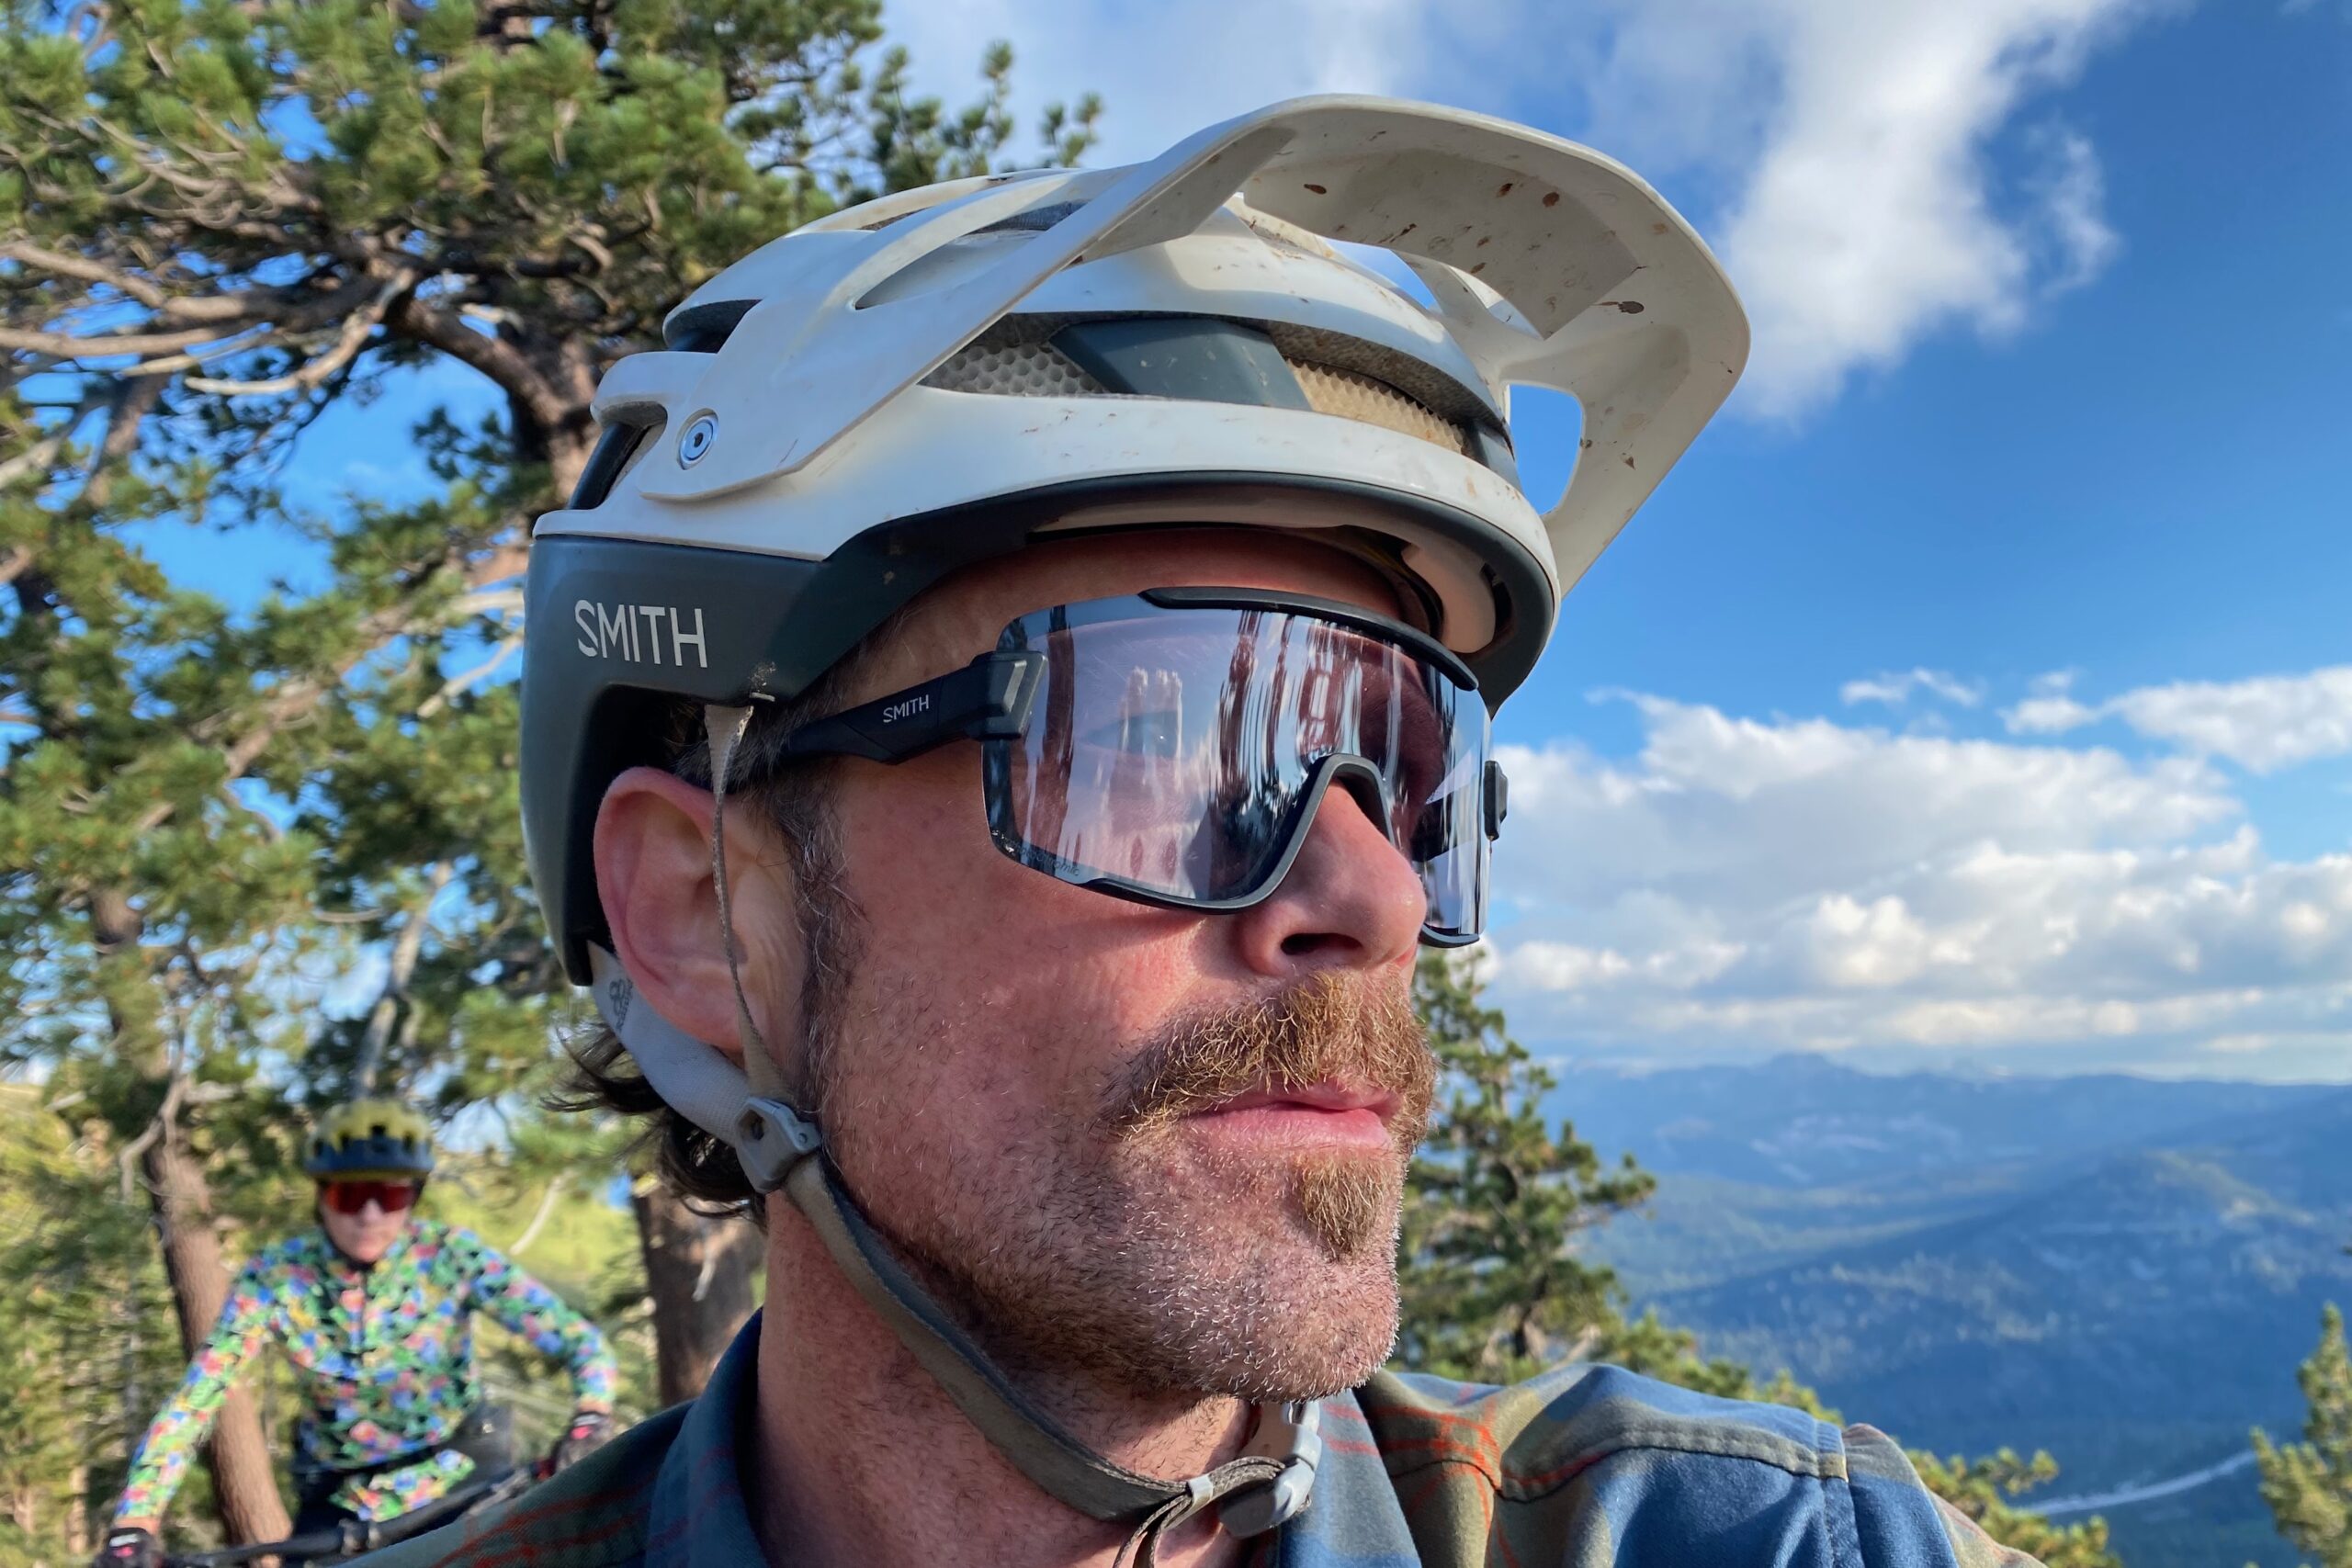 The BEST Cycling Sunglasses for SMALL Faces